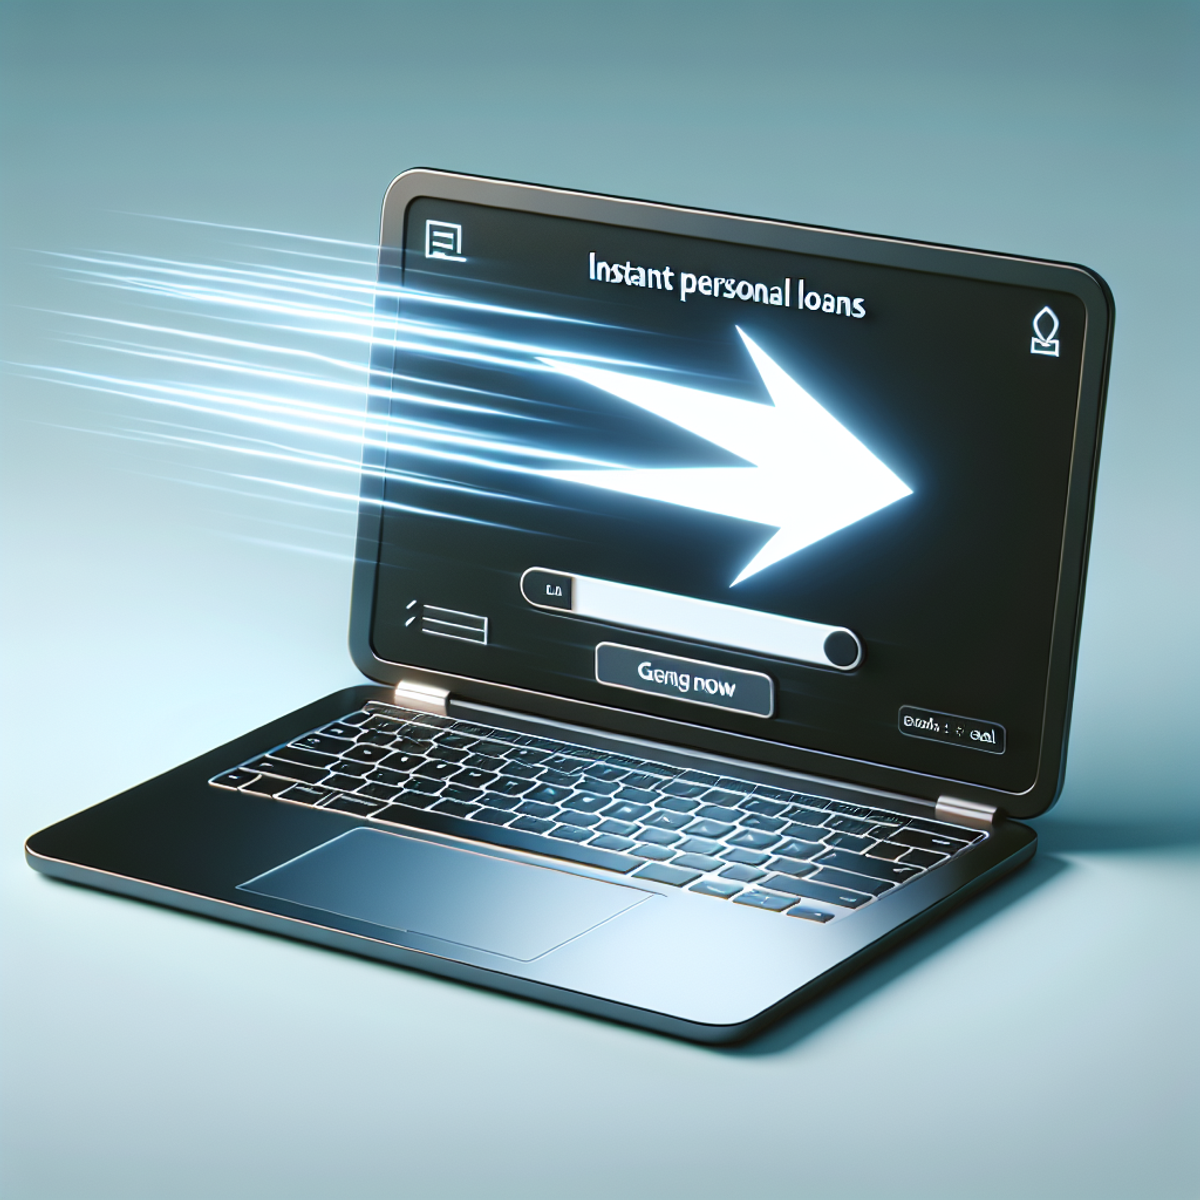 A sleek laptop with a charging lightning bolt symbolizing instant personal loans.